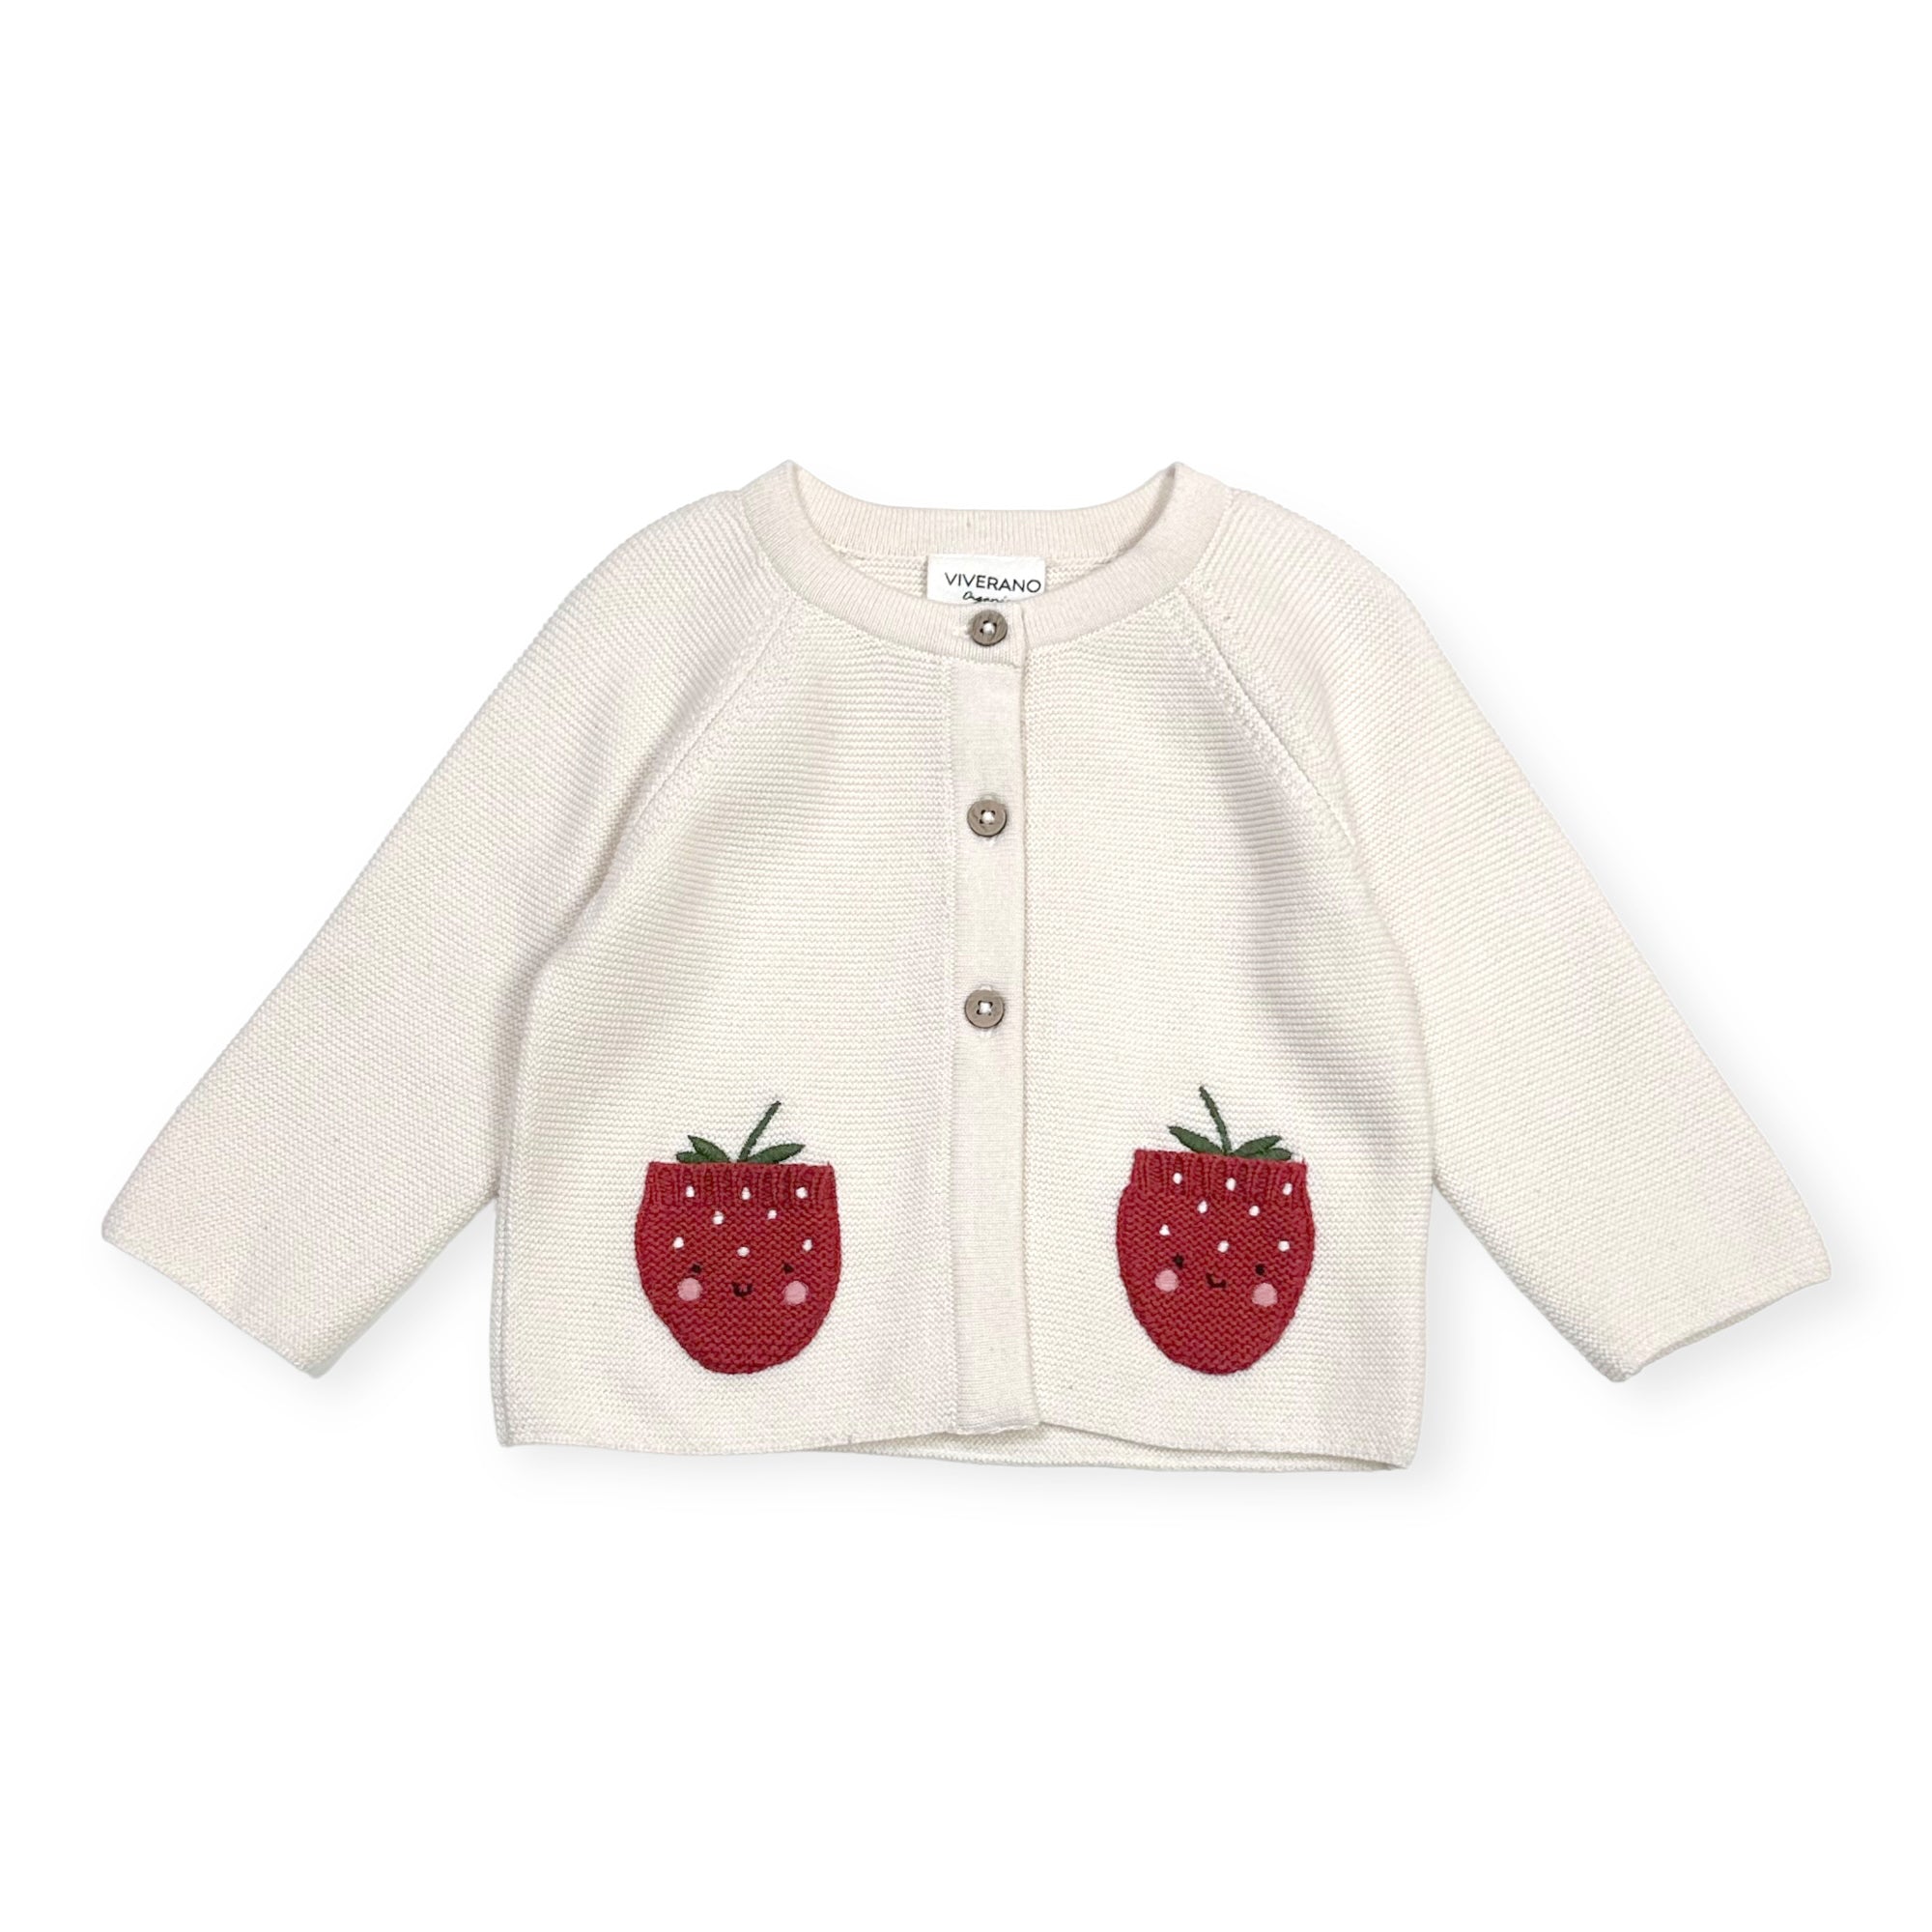 Strawberry Embroidered Pocket Baby Cardigan (Organic Cotton)Strawberry Embroidered Pocket Baby Cardigan (Organic Cotton)